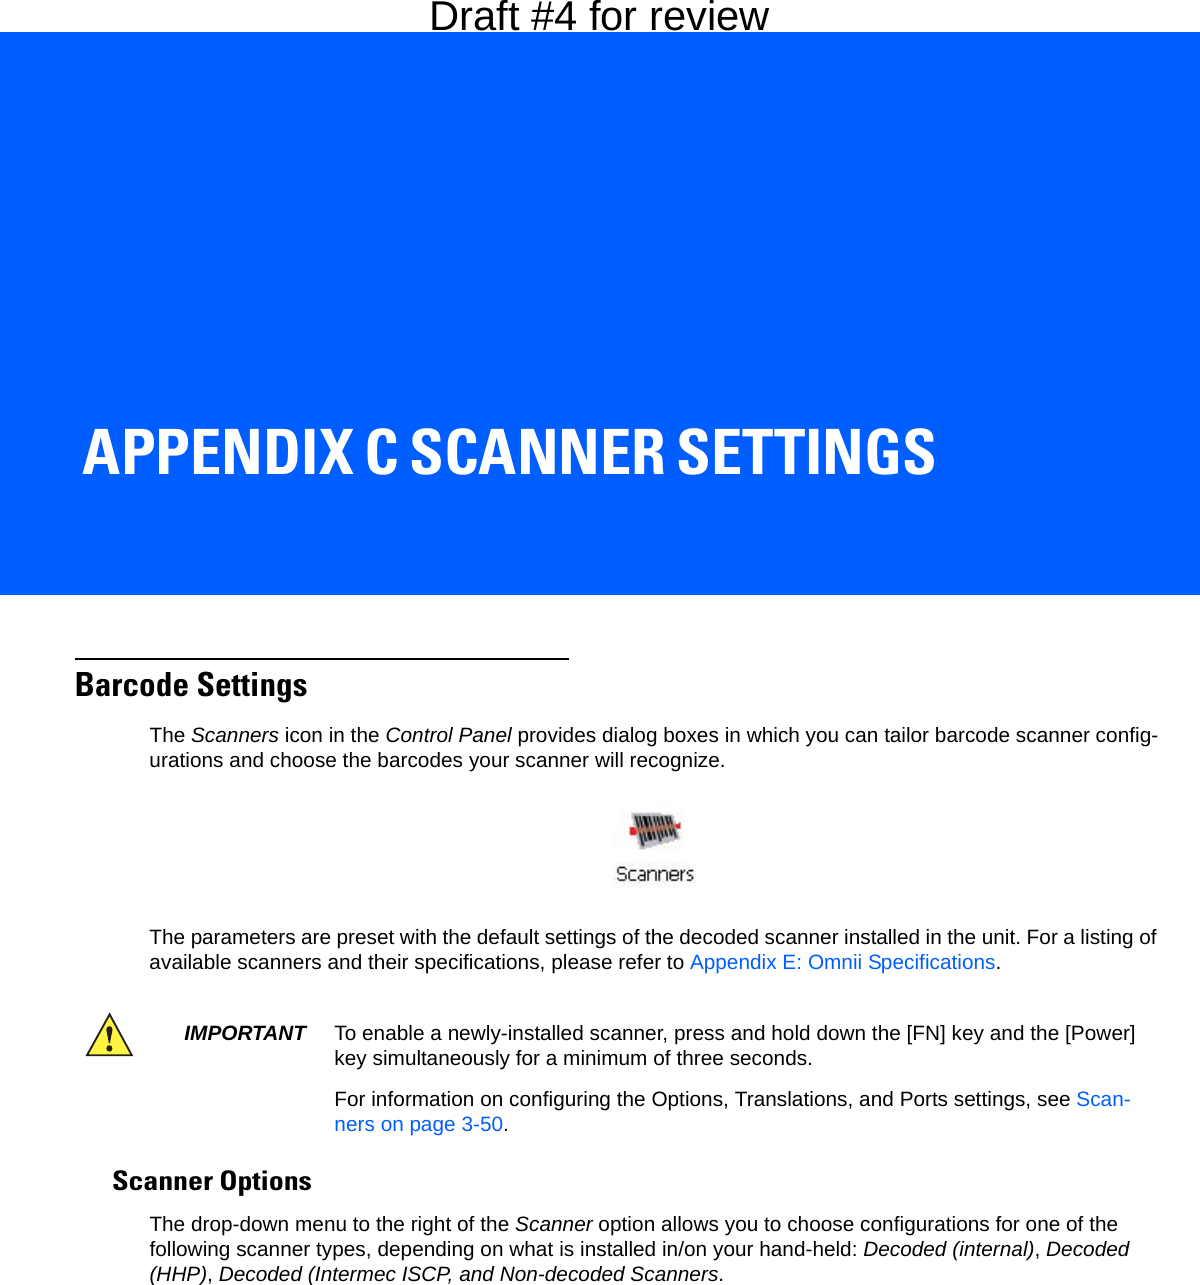 APPENDIX C SCANNER SETTINGSCScanner SettingsBarcode SettingsThe Scanners icon in the Control Panel provides dialog boxes in which you can tailor barcode scanner config-urations and choose the barcodes your scanner will recognize.The parameters are preset with the default settings of the decoded scanner installed in the unit. For a listing of available scanners and their specifications, please refer to Appendix E: Omnii Specifications. Scanner OptionsThe drop-down menu to the right of the Scanner option allows you to choose configurations for one of the following scanner types, depending on what is installed in/on your hand-held: Decoded (internal), Decoded (HHP), Decoded (Intermec ISCP, and Non-decoded Scanners.IMPORTANT To enable a newly-installed scanner, press and hold down the [FN] key and the [Power] key simultaneously for a minimum of three seconds. For information on configuring the Options, Translations, and Ports settings, see Scan-ners on page 3-50.Draft #4 for review